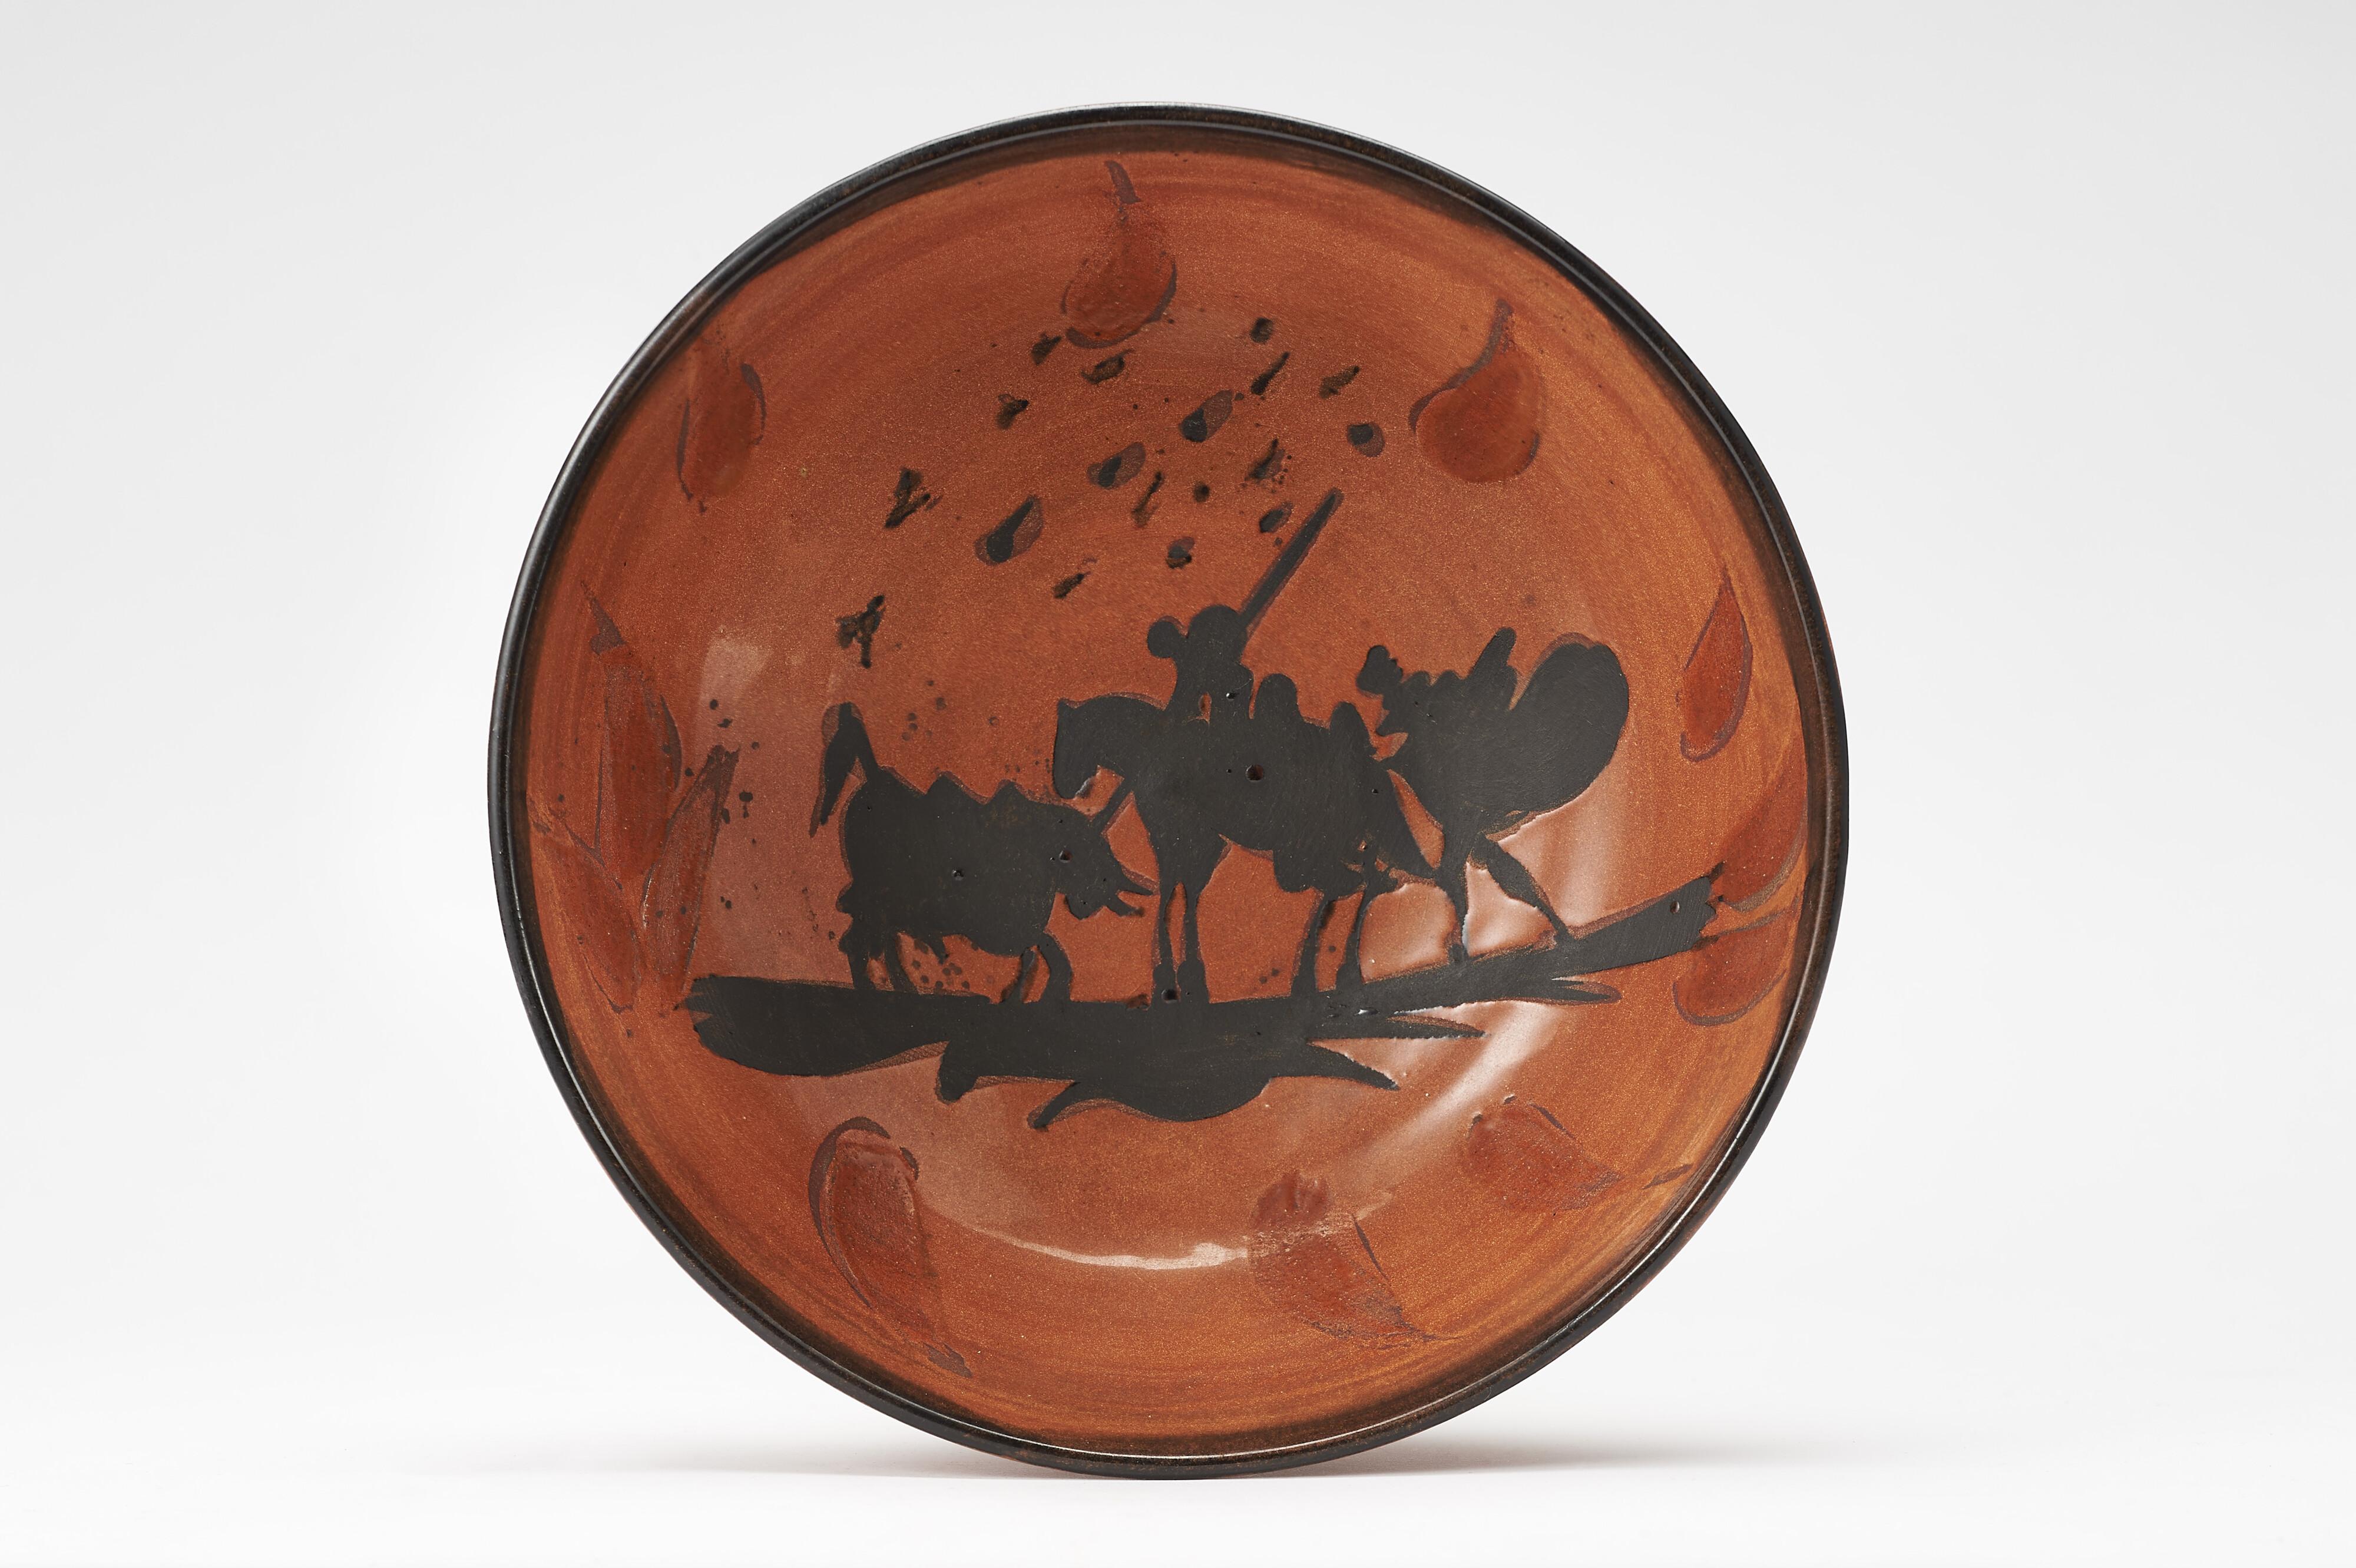 Picador (A.R. 211)
partially glazed ceramic bowl , Edited in 1953
Limited edition of 500 exemplars
marked and numbered ‘Edition Picasso 298/500 Madoura’ (underneath)
Diameter: 6½ in. (16.5 cm.)

Excellent conditions

Literature: A. Ramié, n. 211

A